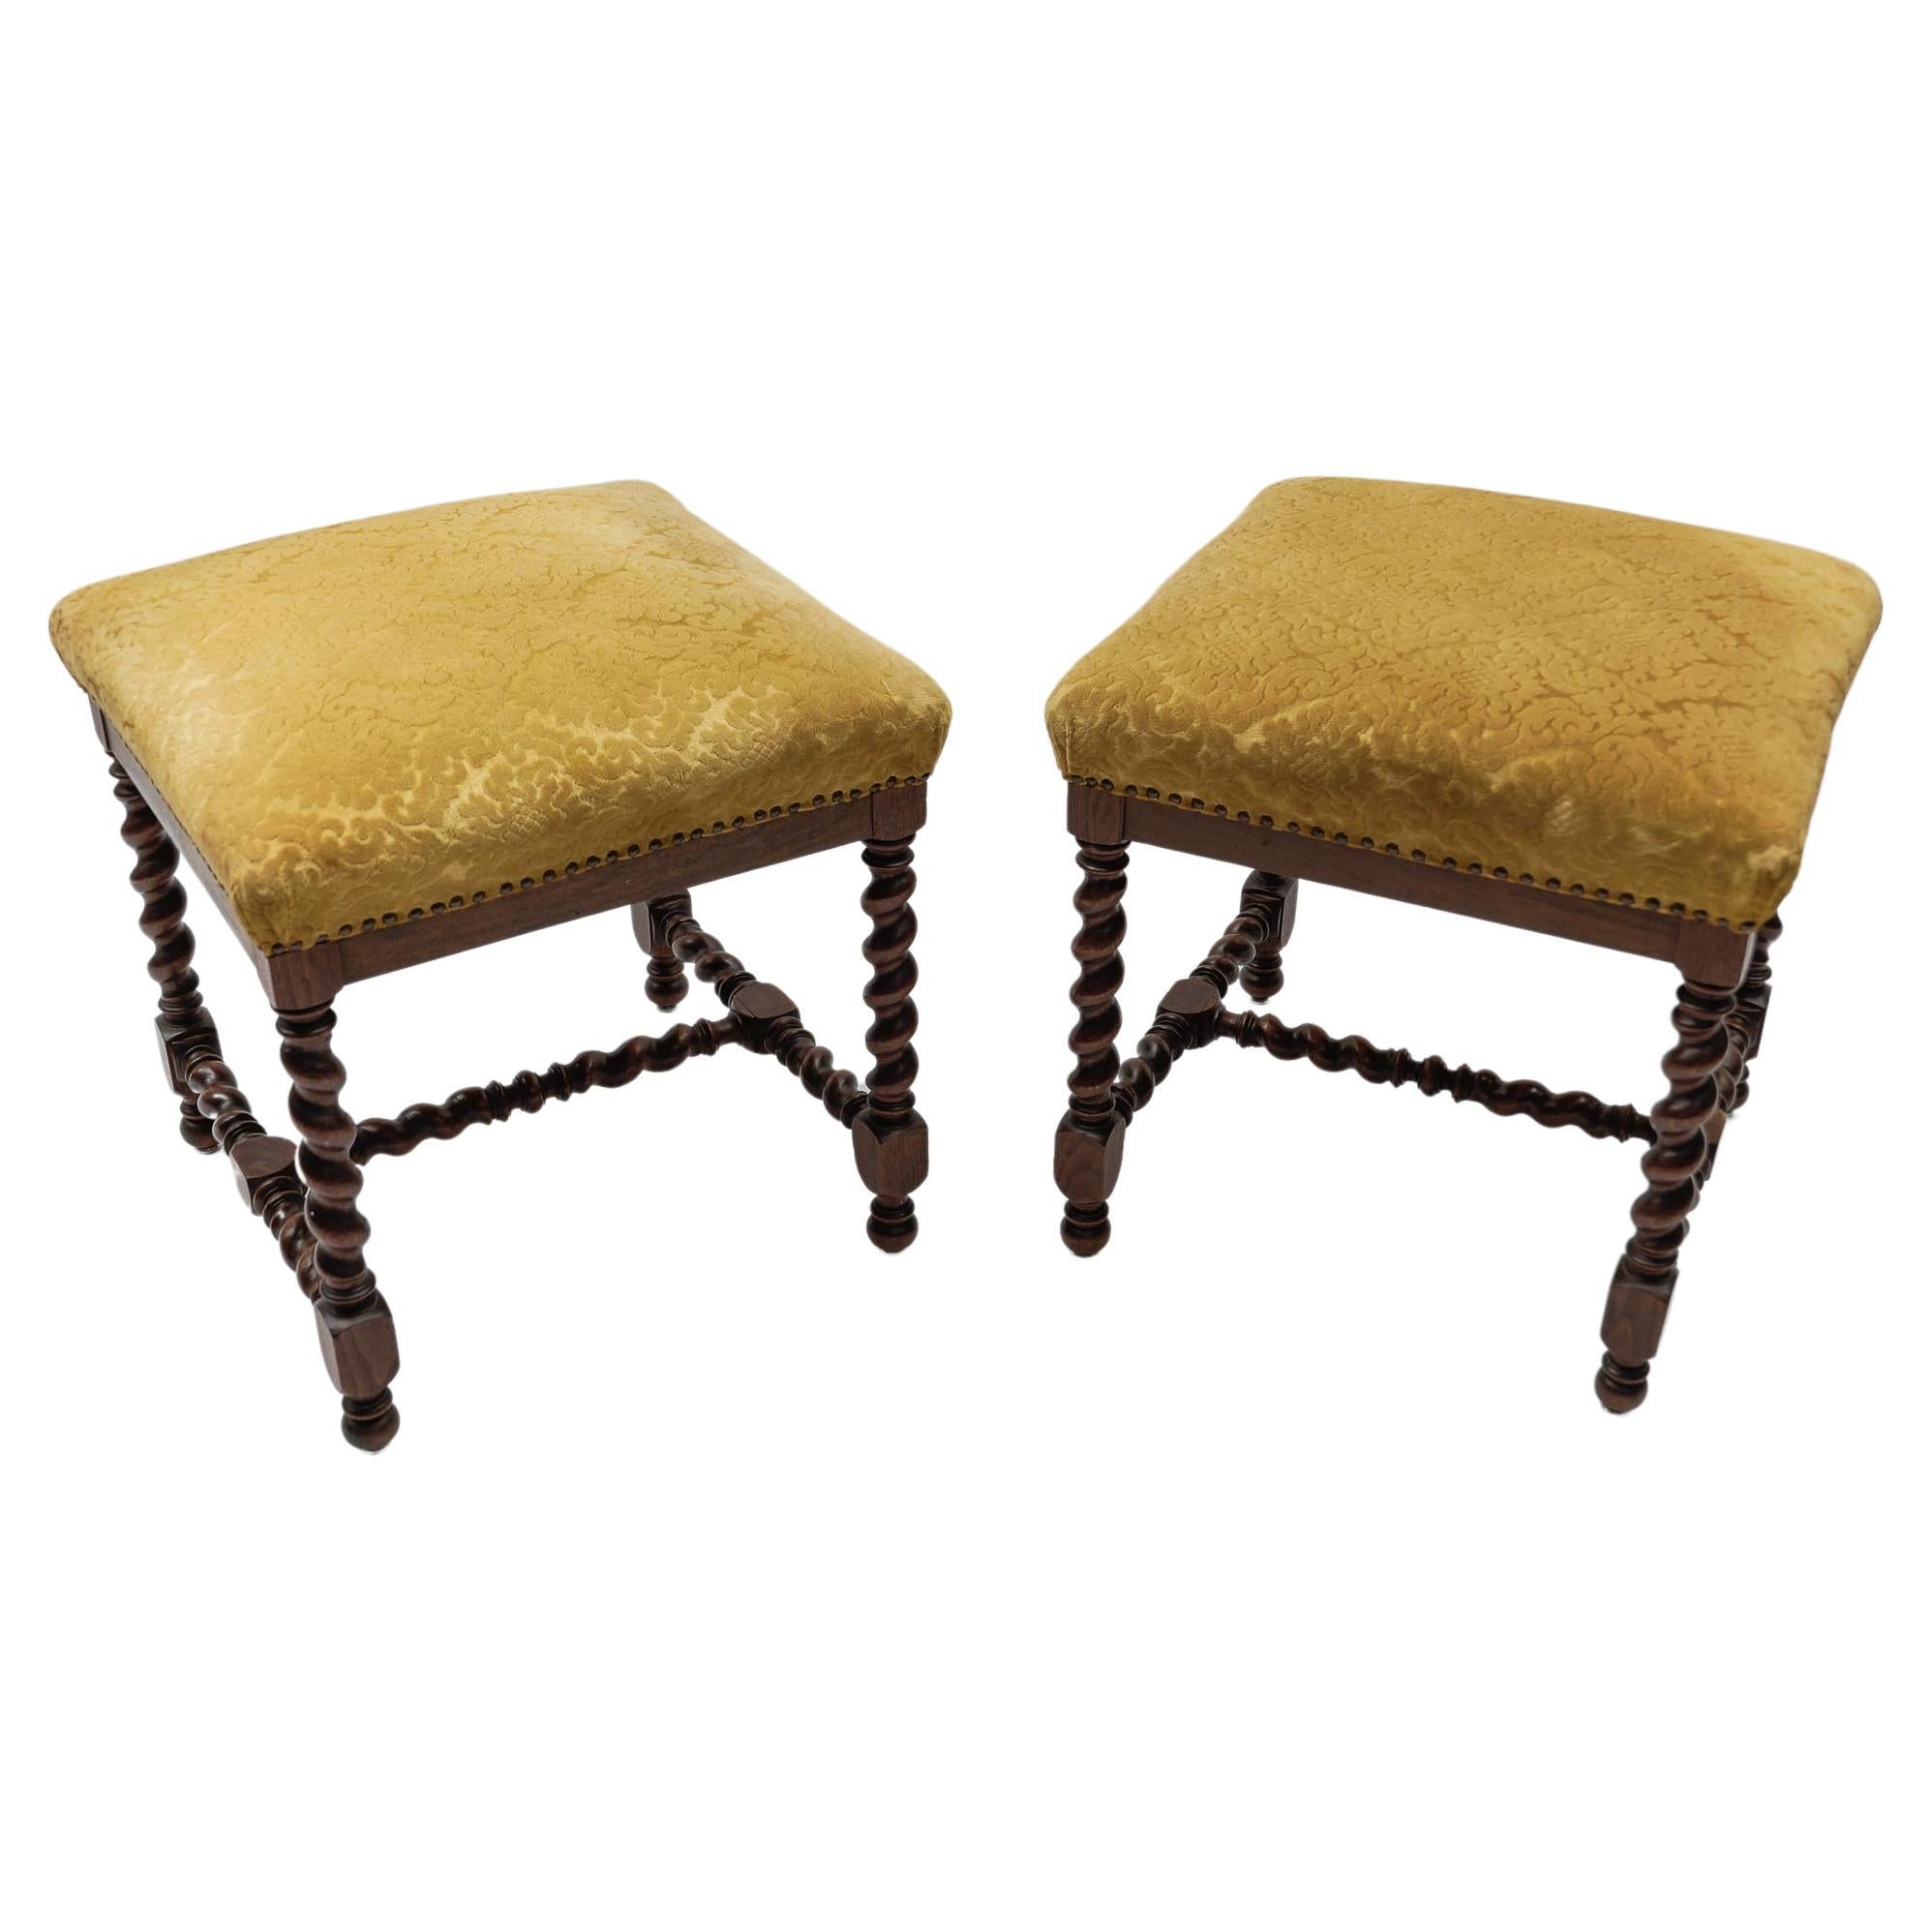 Two French Barley Wood Stools in Louis XIII Style, ca. 1870s For Sale